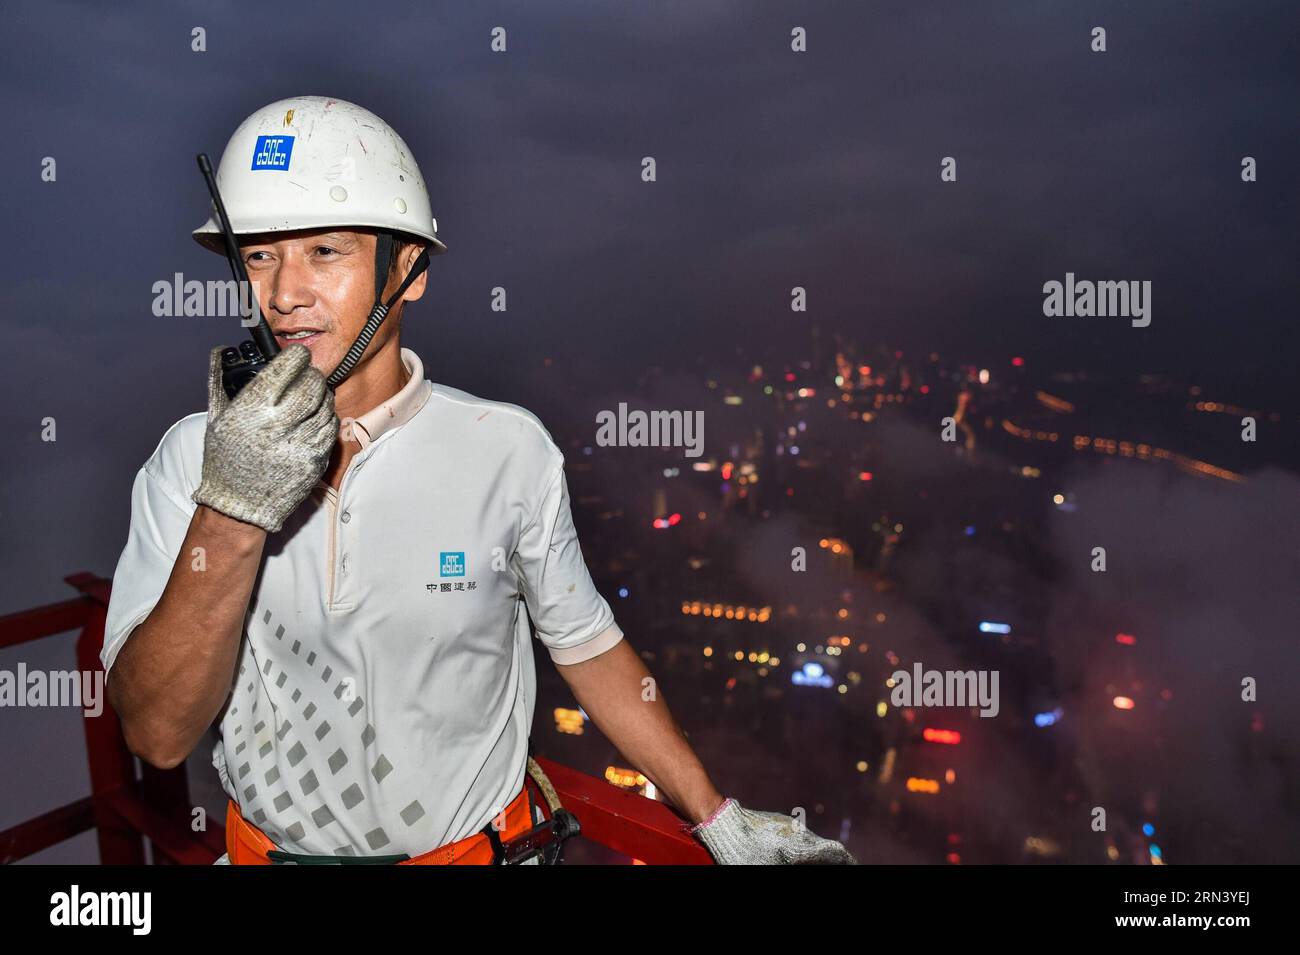 (150430) -- SHENZHEN, April 30, 2015 -- Photo taken on April 18, 2015 shows Wang Hua, a tower crane operator, communicates with signalman through a walkie talkie on a tower crane in Shenzhen, south China s Guangdong Province. Wang Hua, a 50-year-old from central China s Henan Province, is a good hand in operating tower crane. Though he used to be a security guard when he was young, he quickly grew into an excellent tower crane operator due to his diligence and love of learning. He was engaged in many larger construction projects like the new site of CCTV and the Water Cube, and the current pro Stock Photo